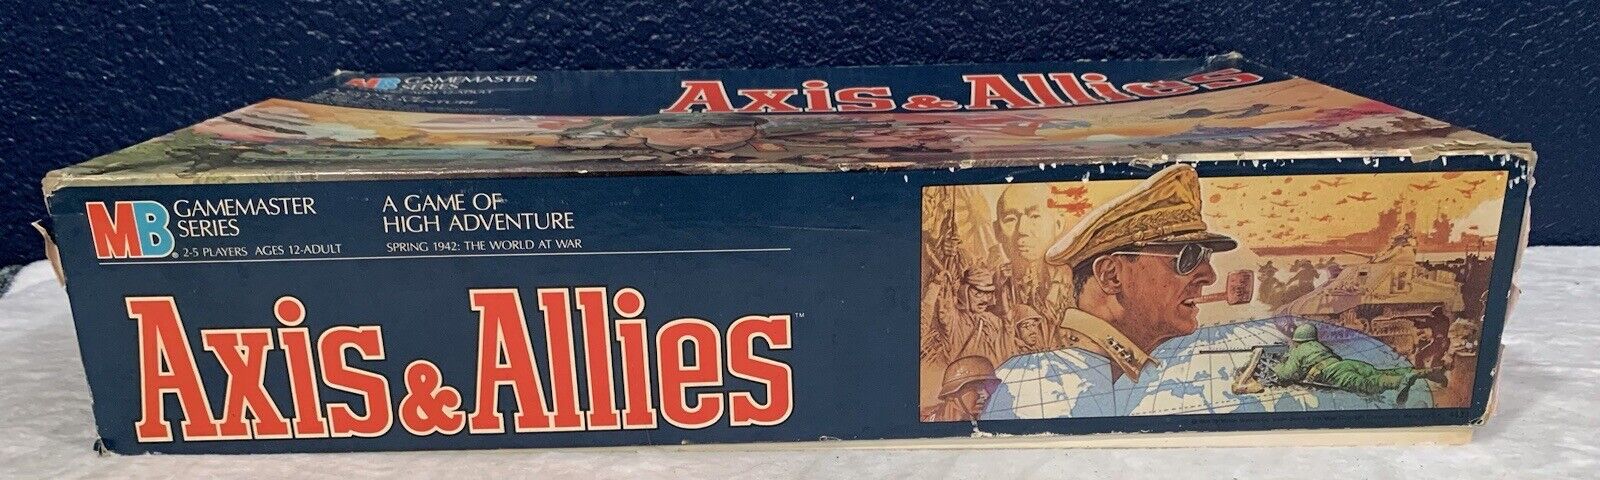 1984 Axis and Allies Game by Milton Bradley Unpunched Complete Open Box Milton Bradley 4423 - фотография #2